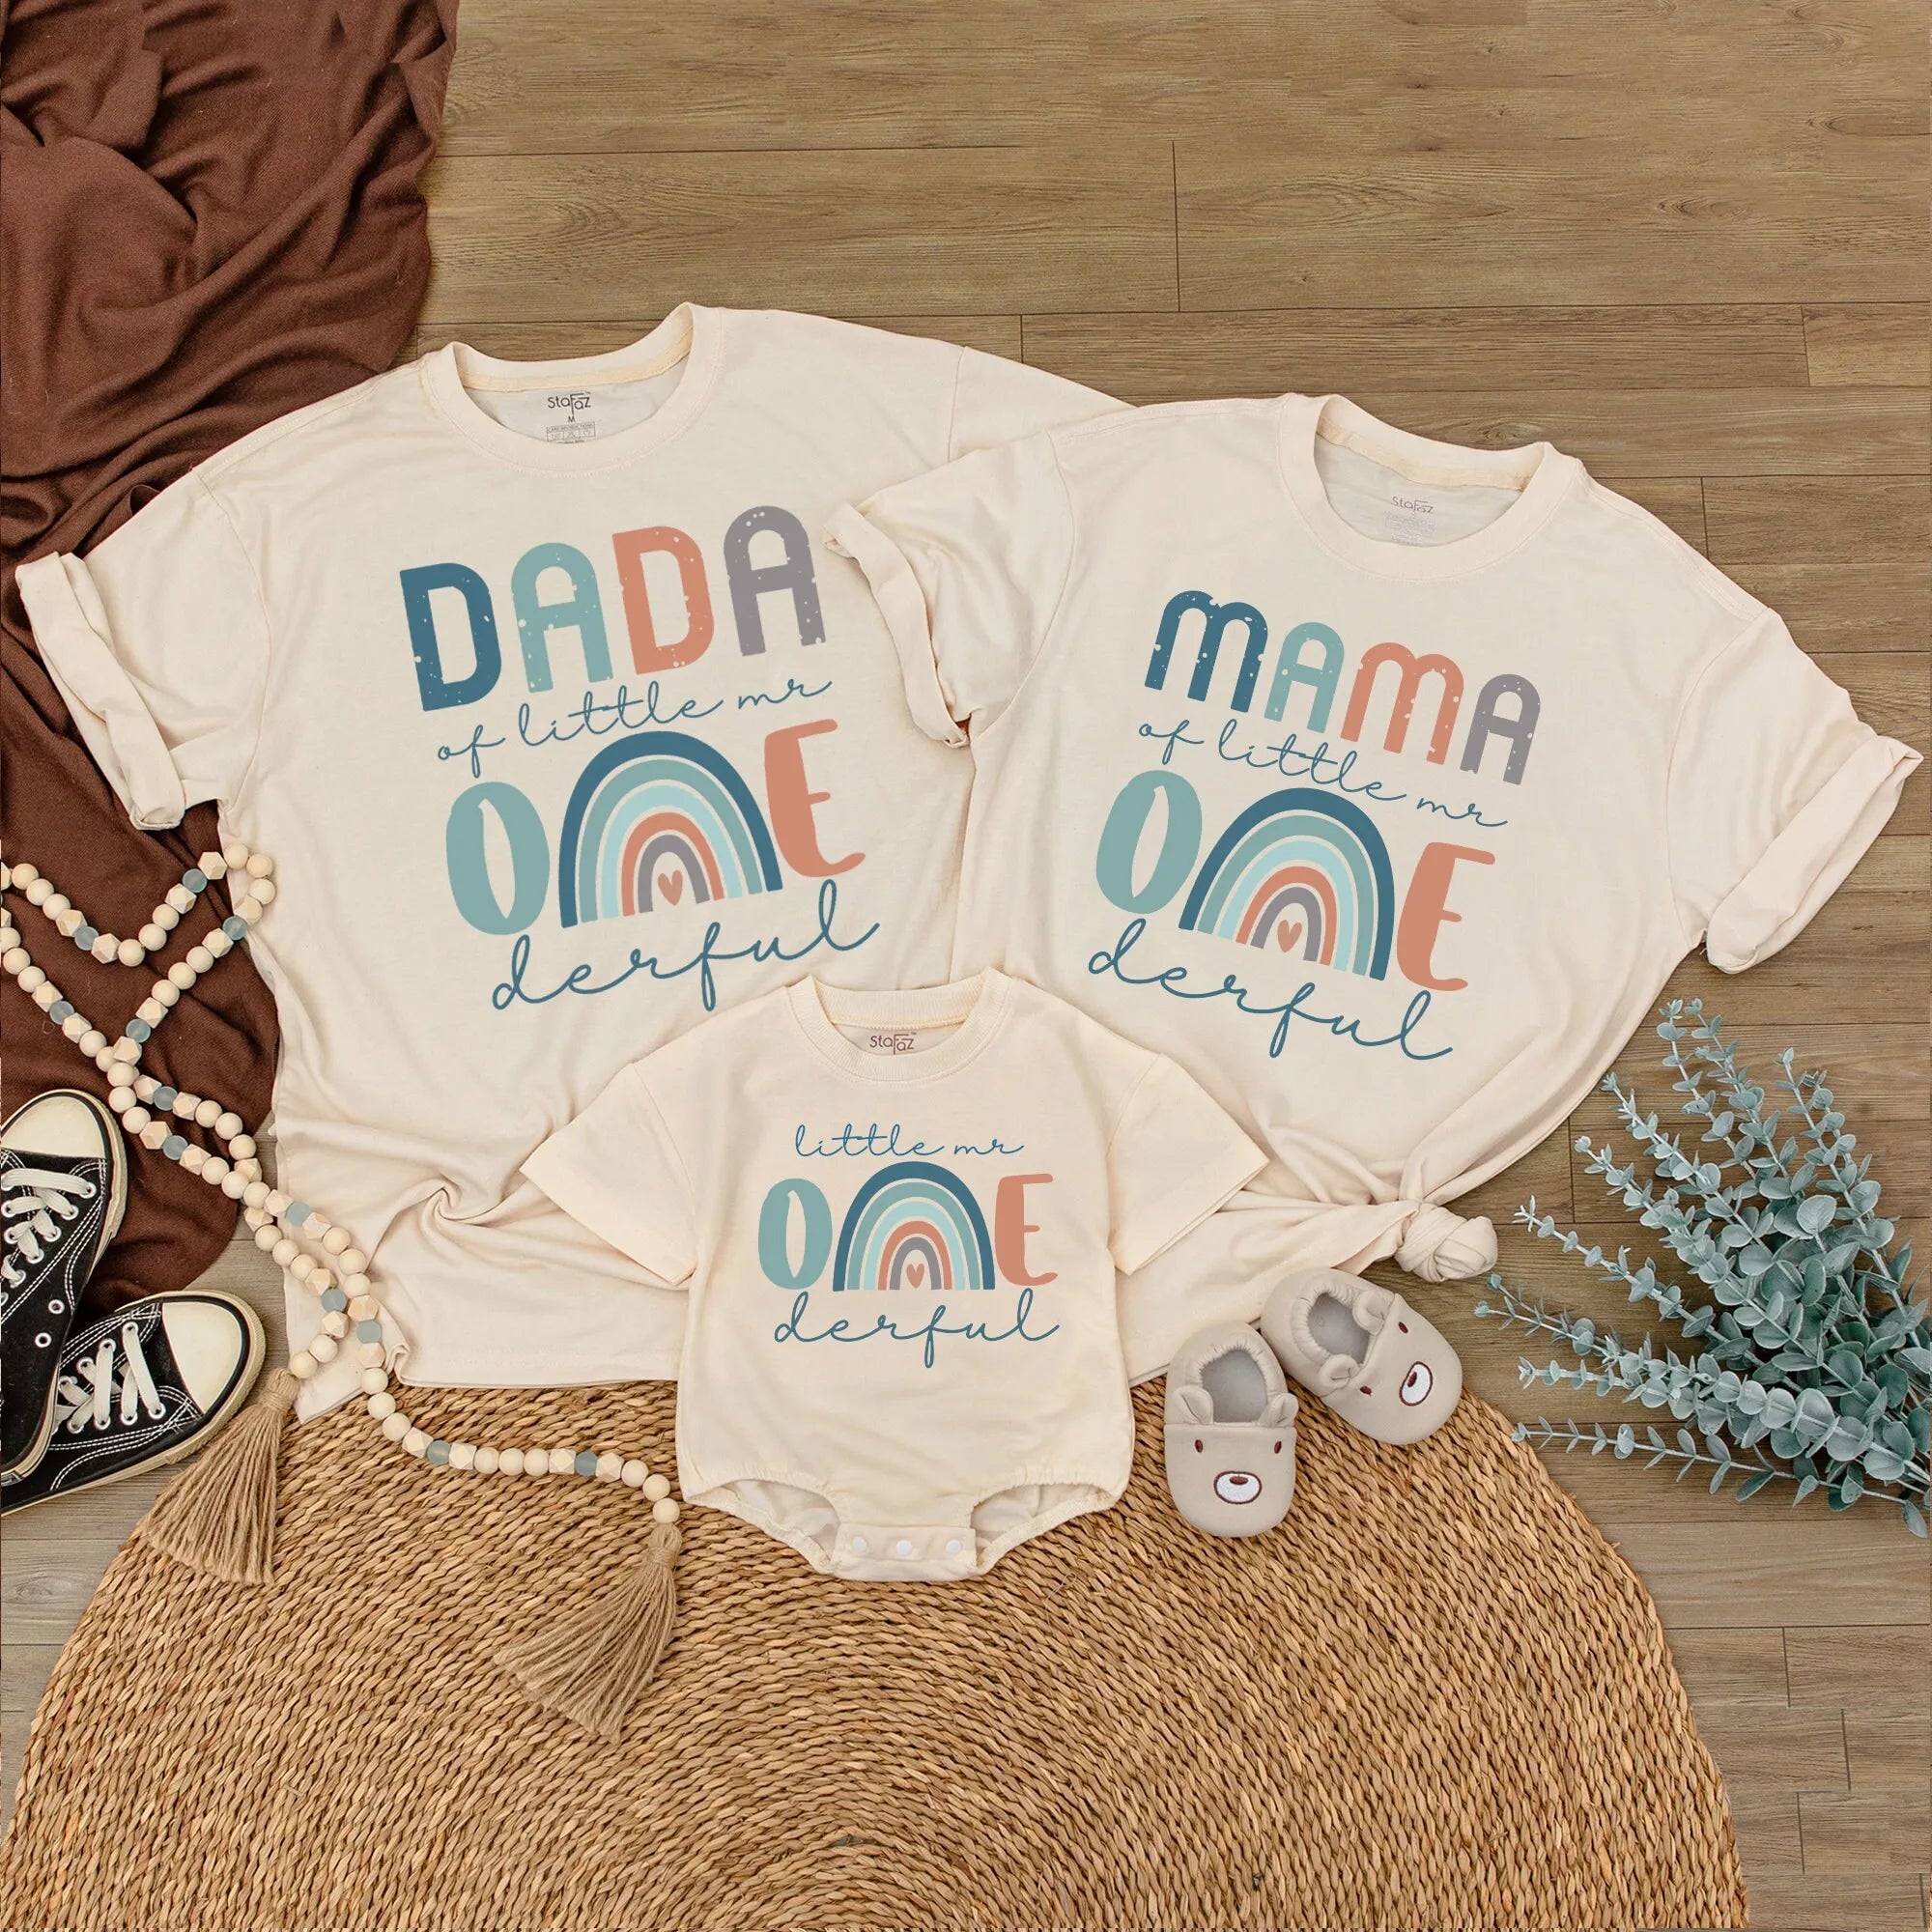 Little Mr. One Derful 1st Birthday: Matching Family Tees